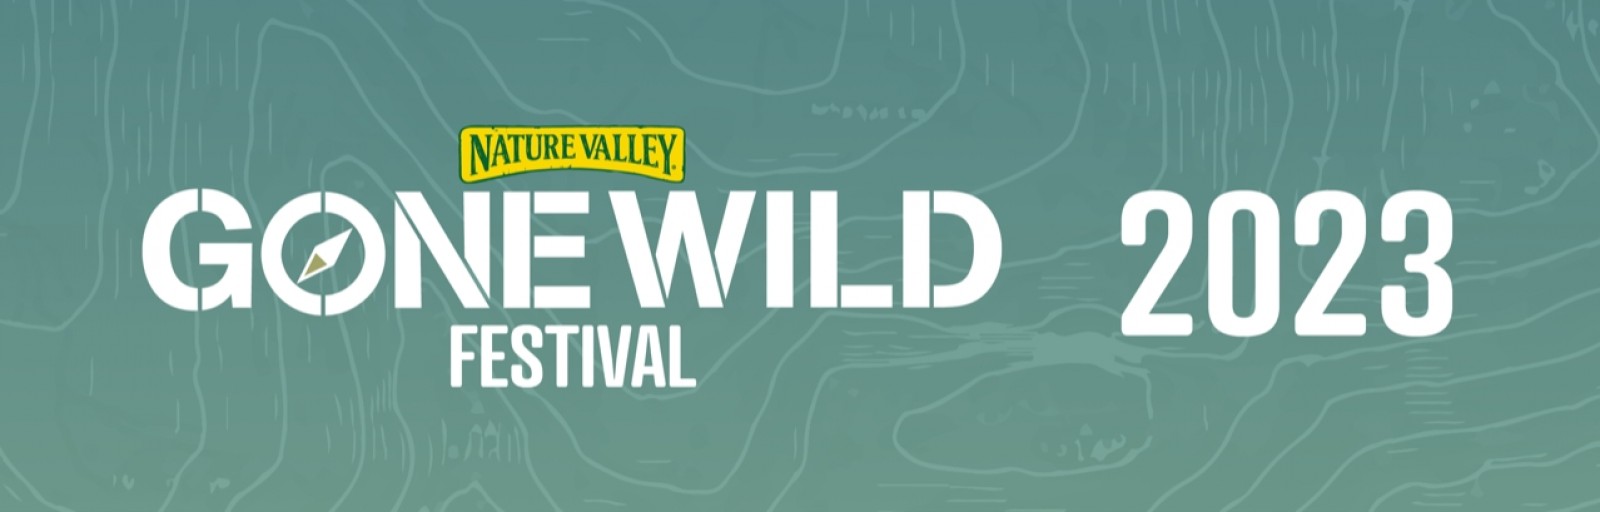 Nature Valley Gone Wild Festival with Bear Grylls